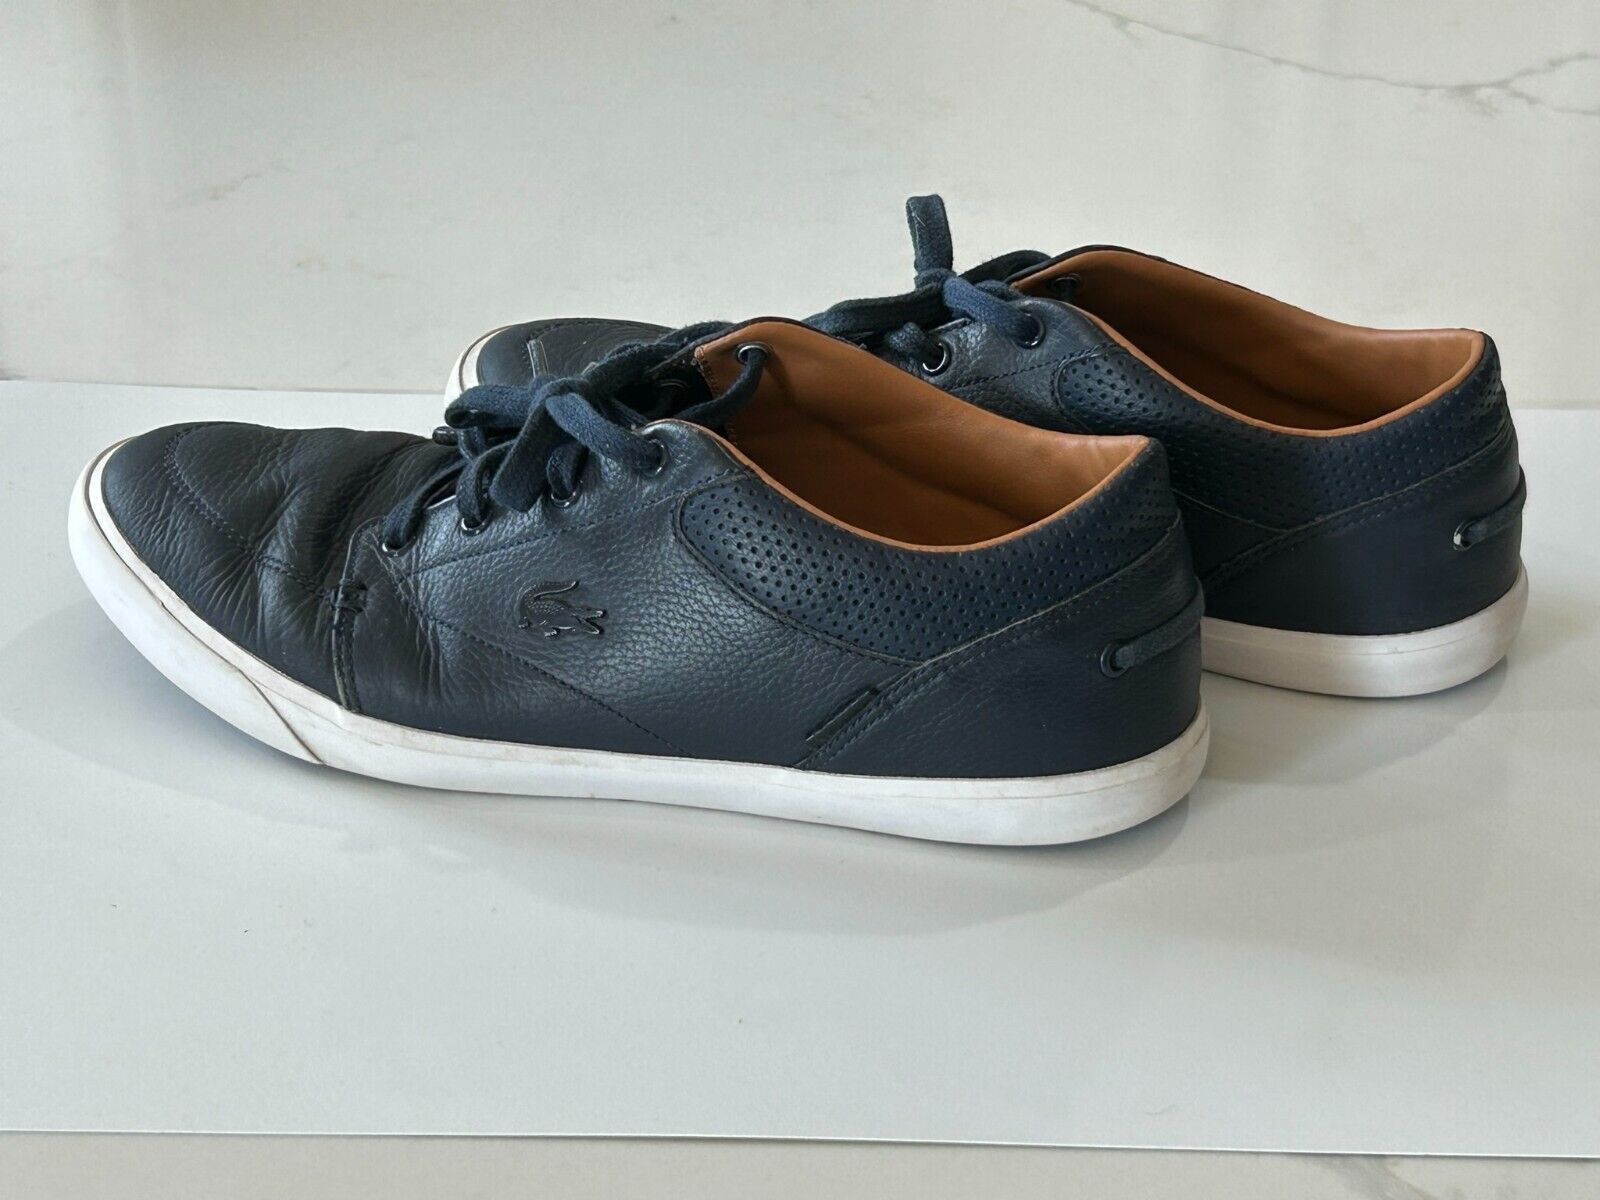 Primary image for Lacoste Shoes Men's 9.5 Bayliss VULC PRM Sneaker Blue Leather Casual Comfort